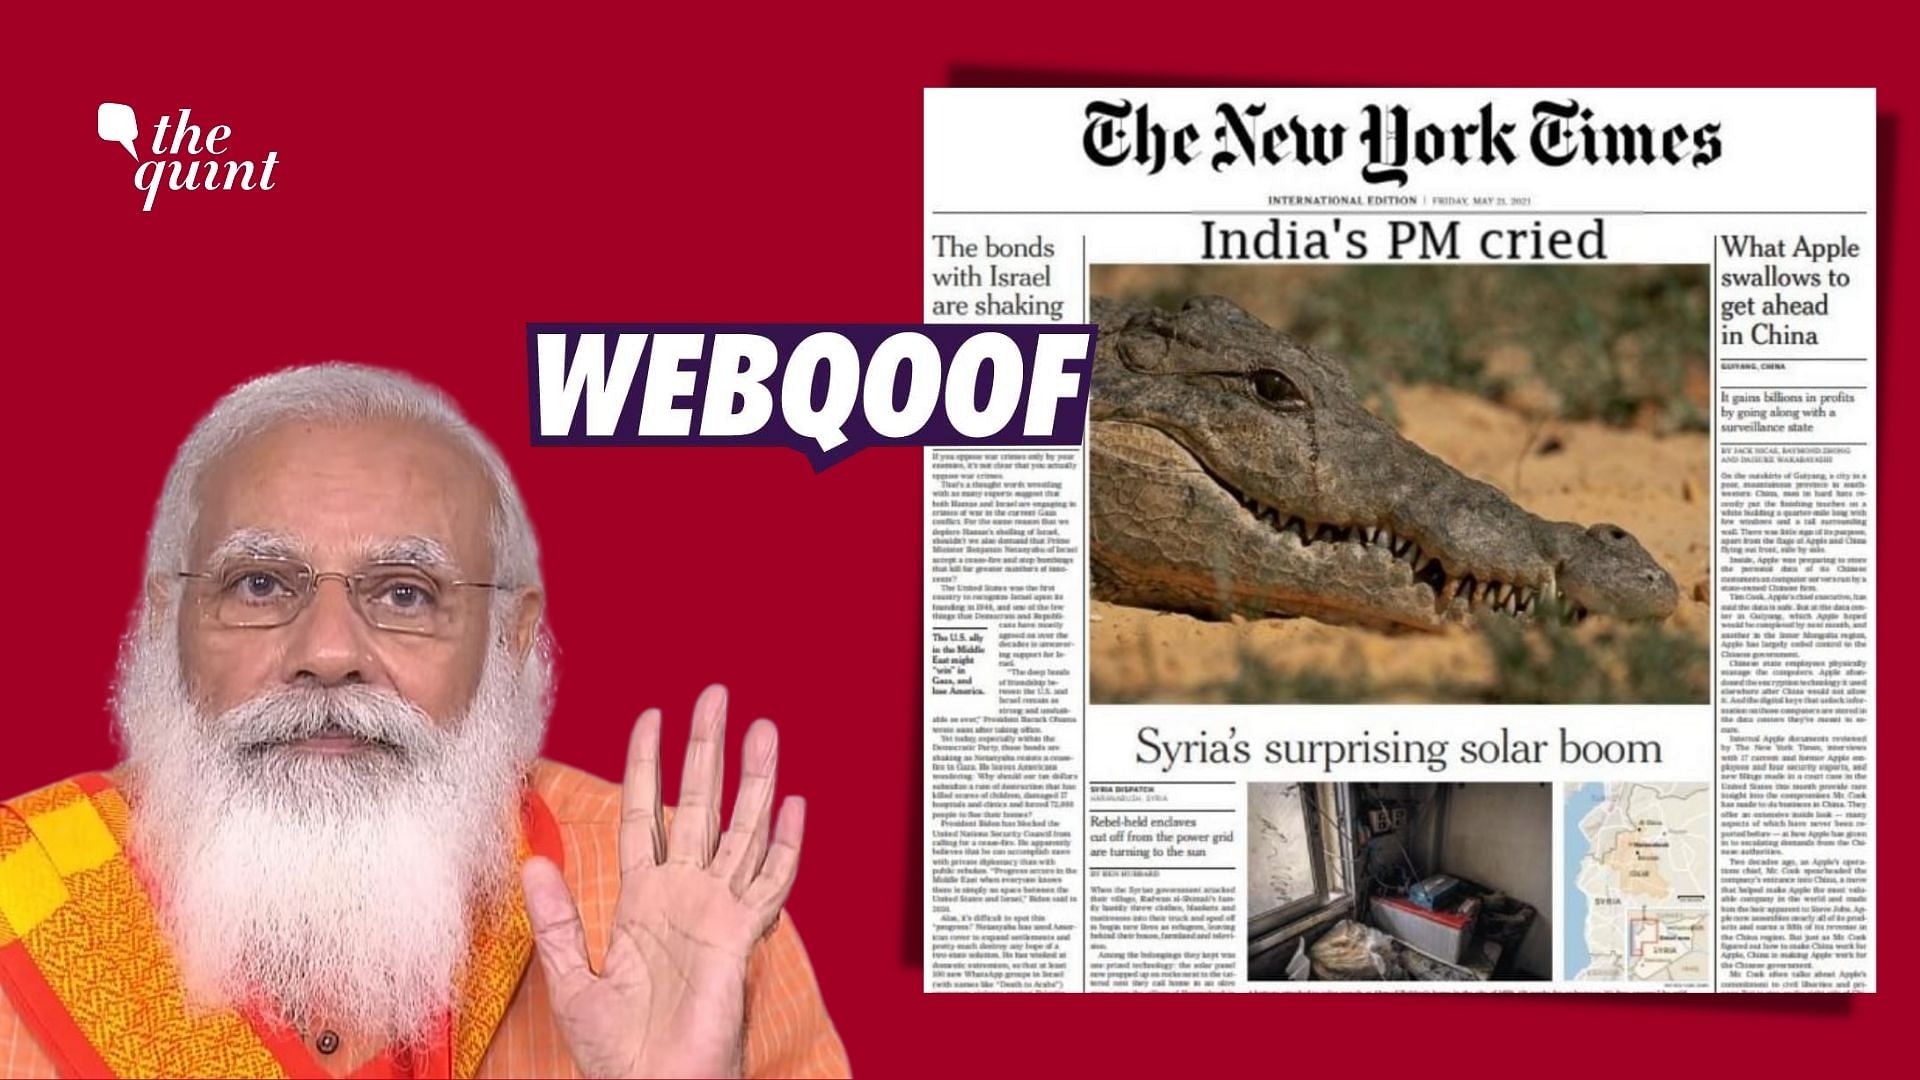 A morphed image of New York Times’ international edition was used to claim that the newspaper used a crocodile’s photo to say that PM Modi cried.